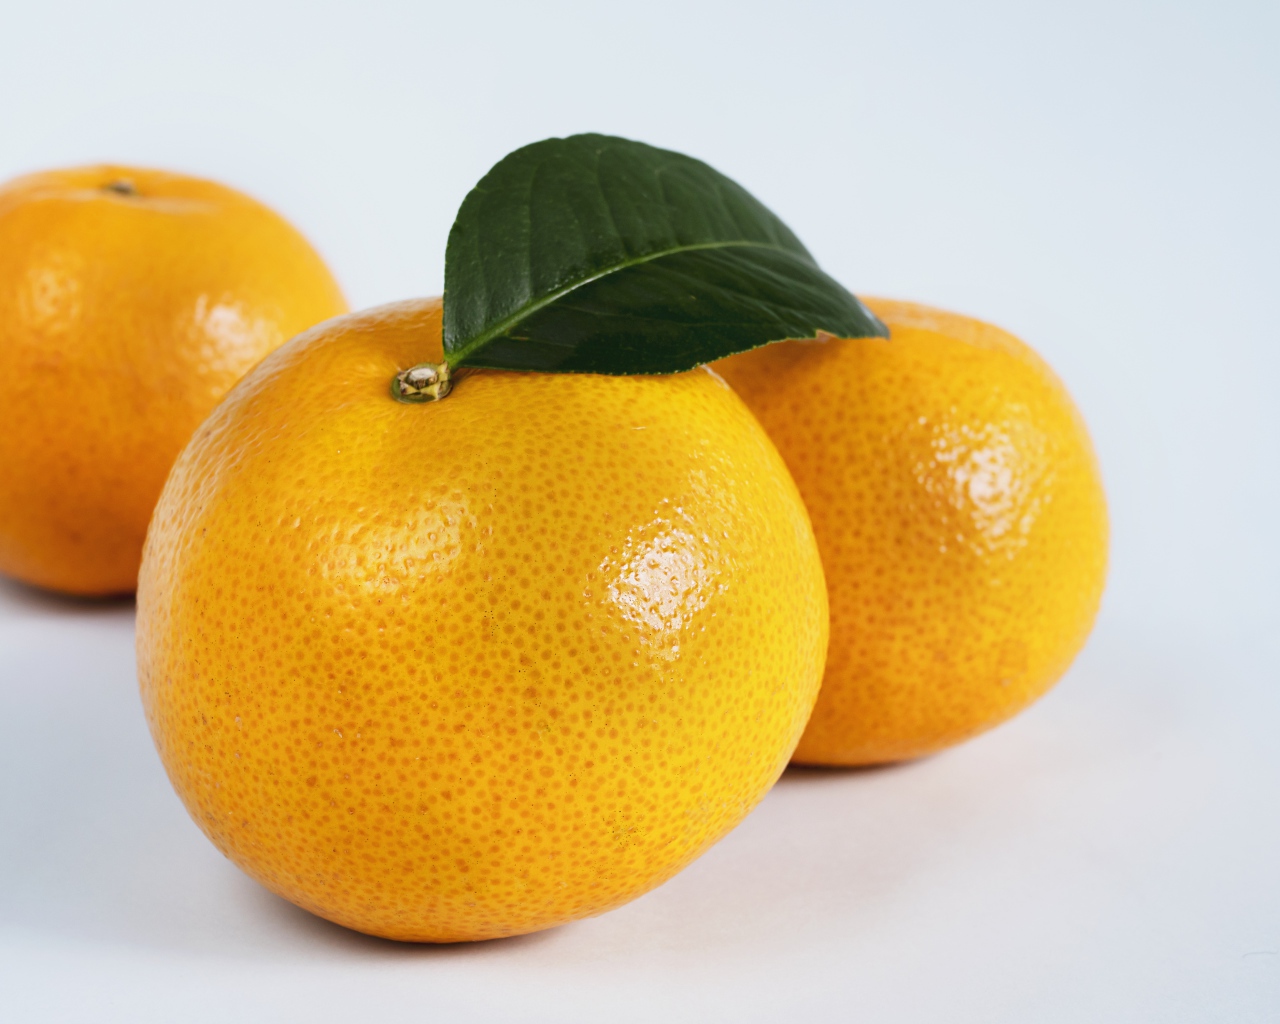 Three large ripe tangerines on a gray background